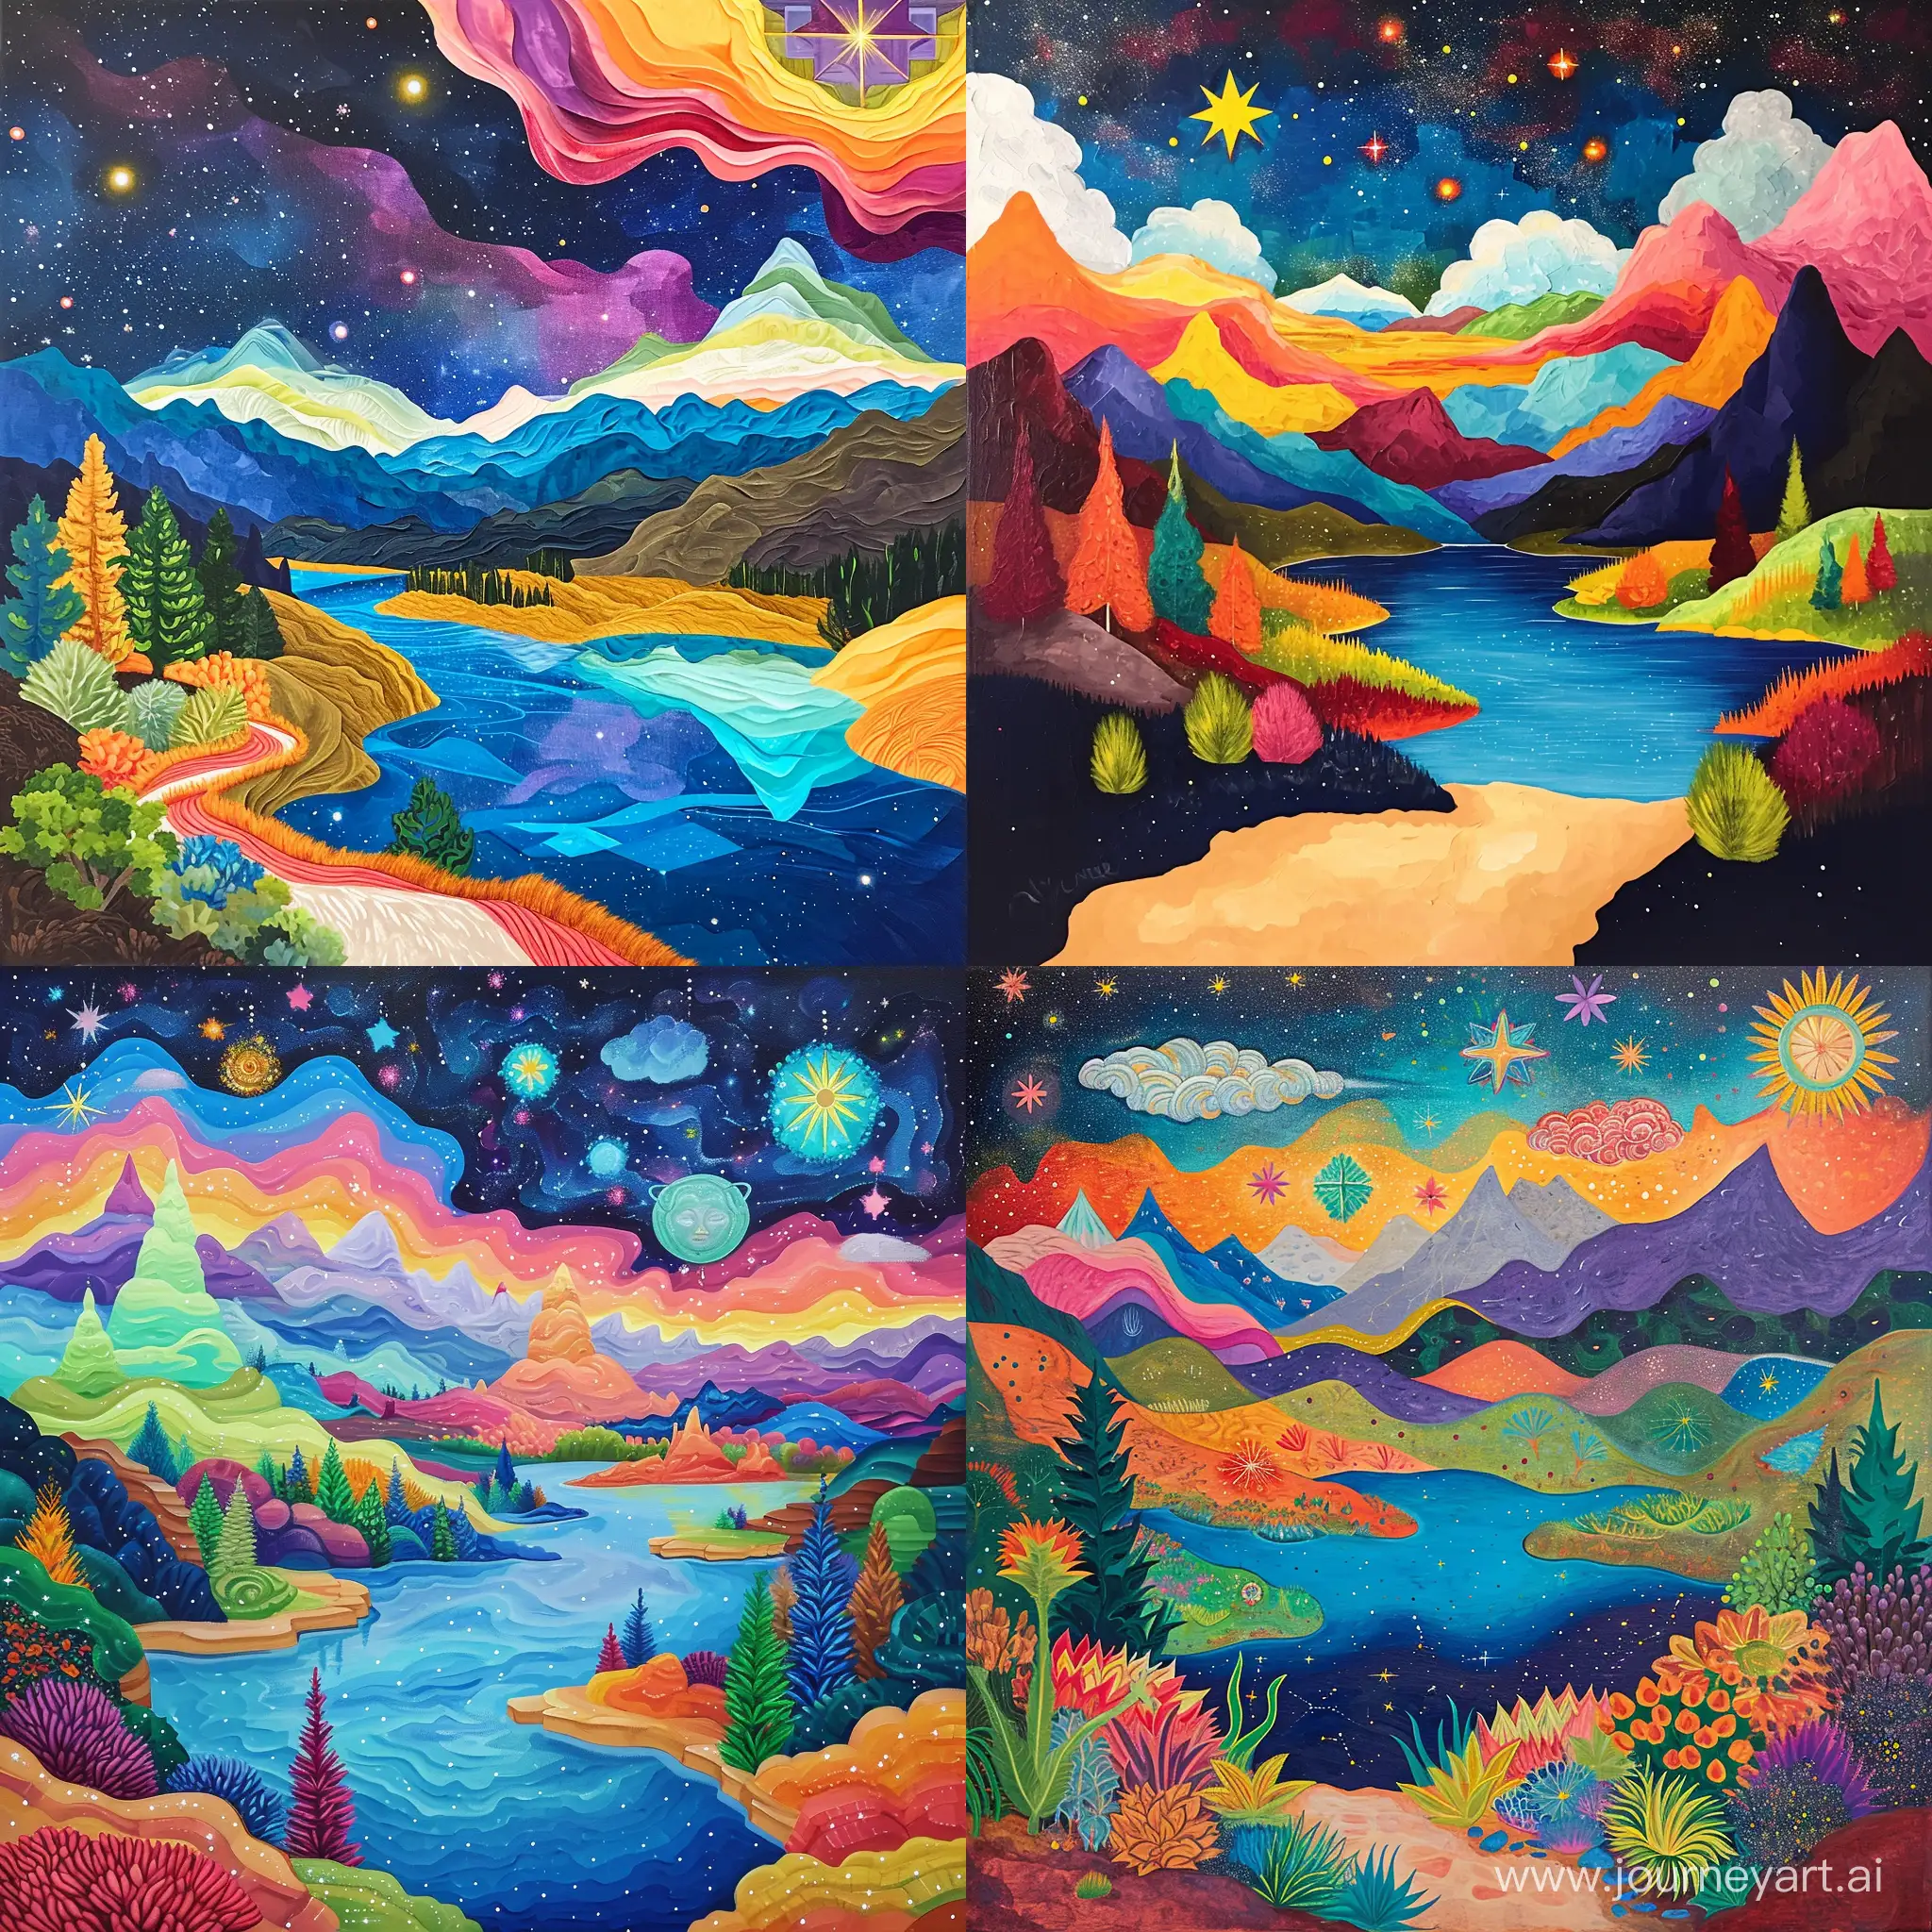 A painting of a colorful, fantastical landscape with mountains, a lake, and stars in the sky. -250